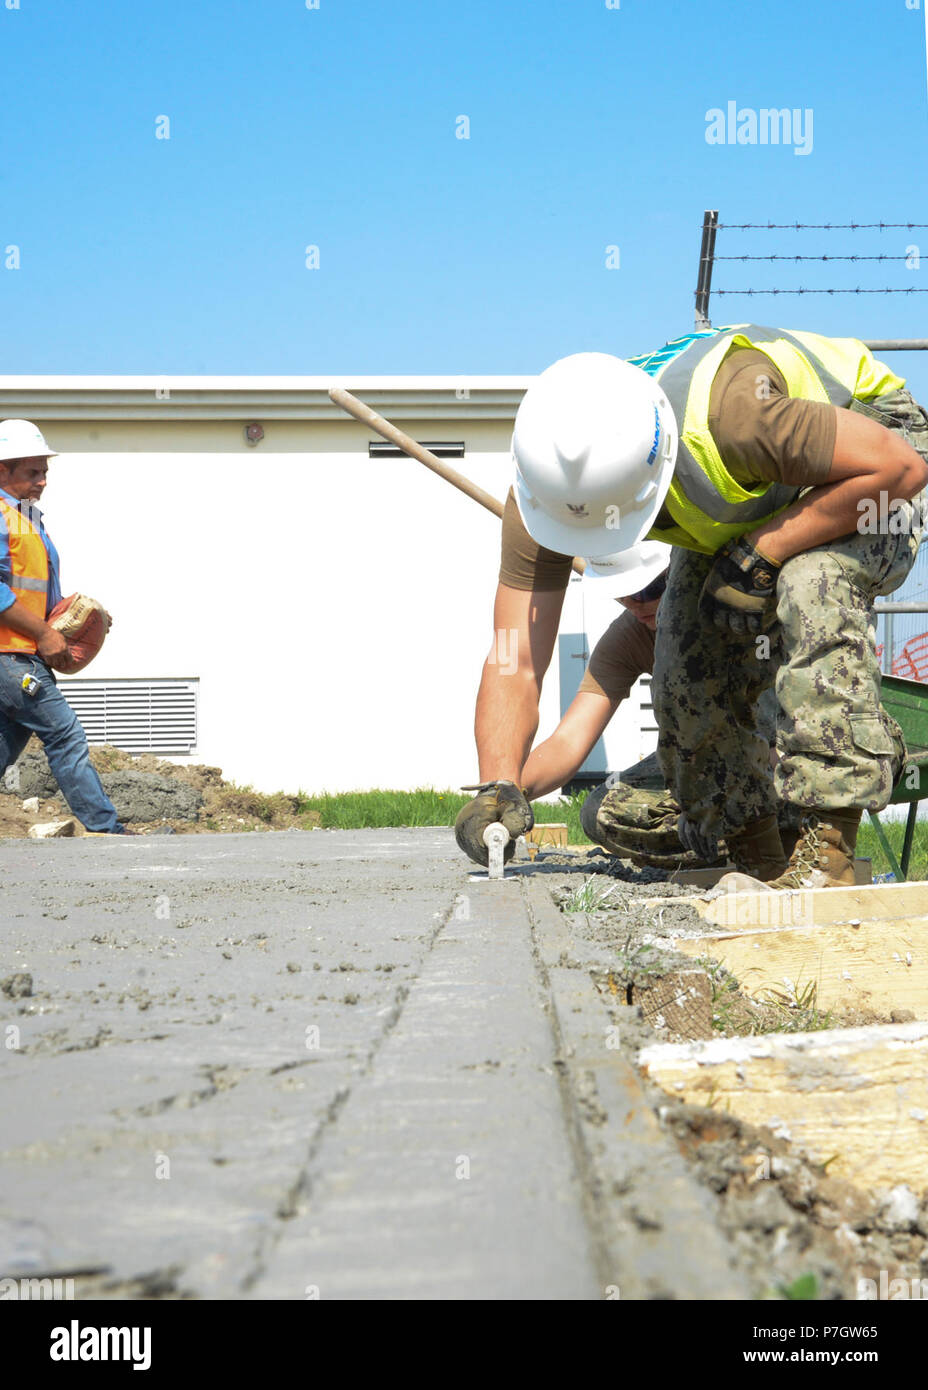 Naples, Italy (September 13, 2016) – Builder 2nd Class Raymond Fenton, assigned to Naval Support Activity Naples Public Works Department, edges wet concrete that will form a slab for a dog kennel on NSA Naples.  Navy Public Works Departments support and maintain facilities and infrastructure on Naval installations worldwide as part of the Naval Facilities Engineering Command (NAVFAC) overall mission. Stock Photo